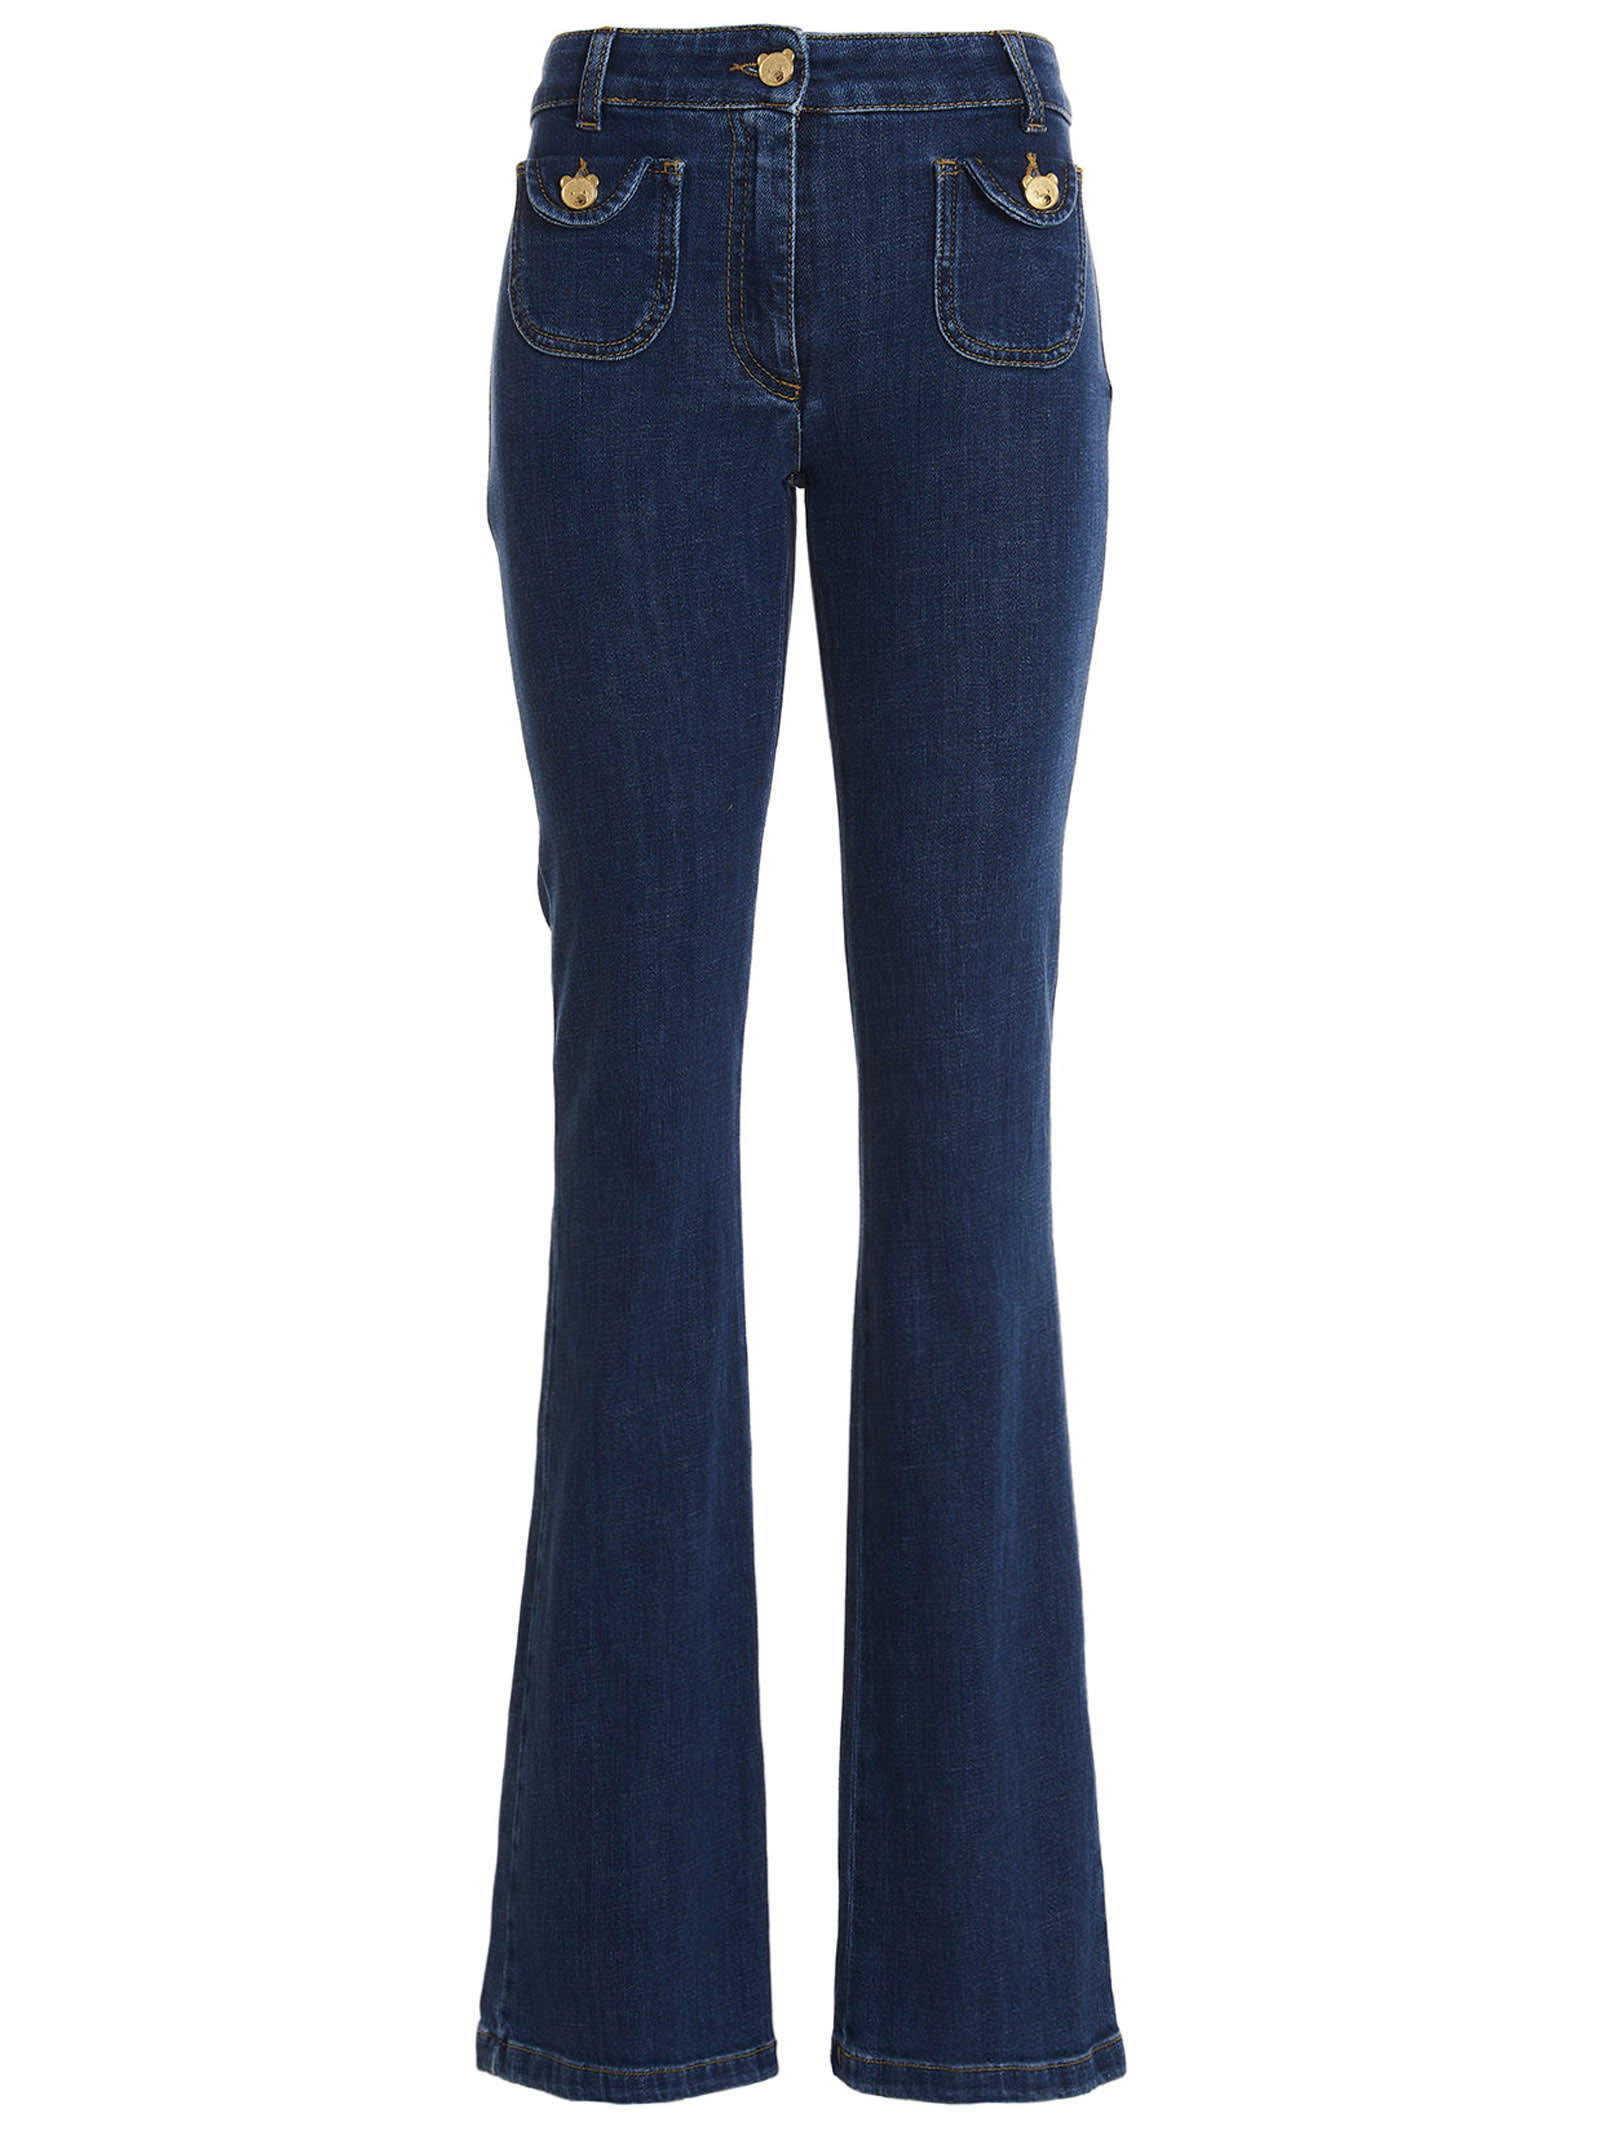 MOSCHINO TEDDY JEANS